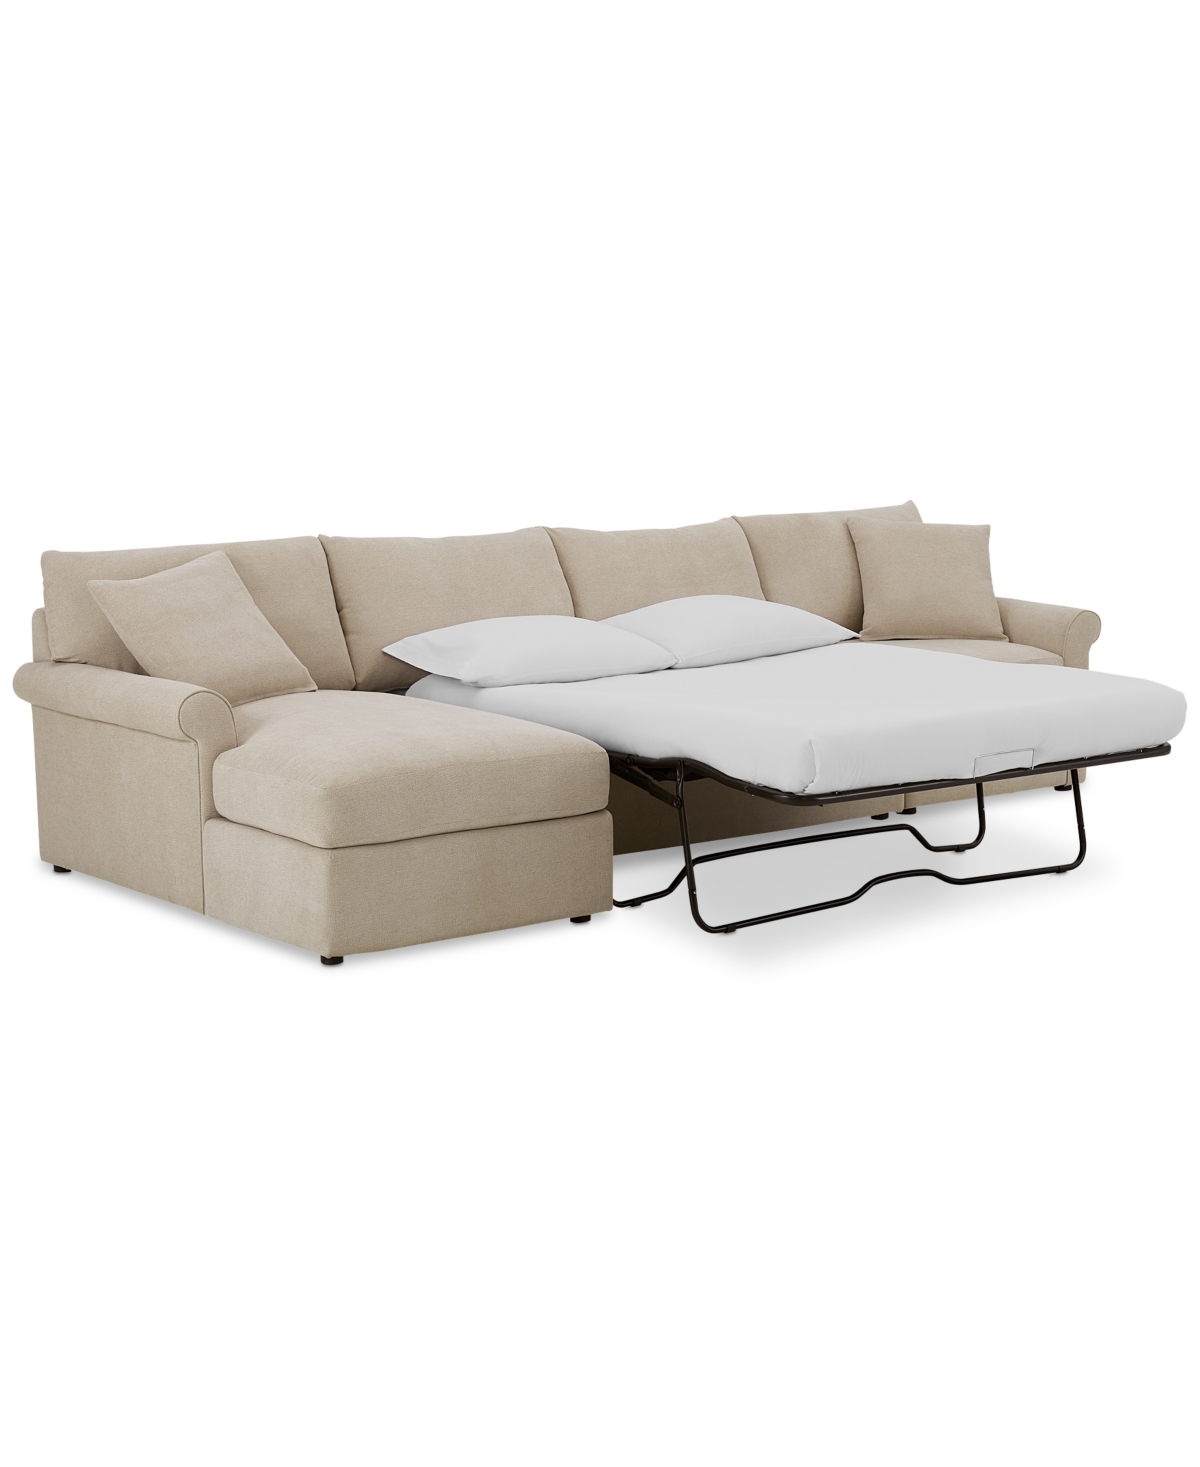 Furniture Wrenley 134" 3-pc. Fabric Sectional Chaise Sleeper Sofa, Created For Macy's In Dove